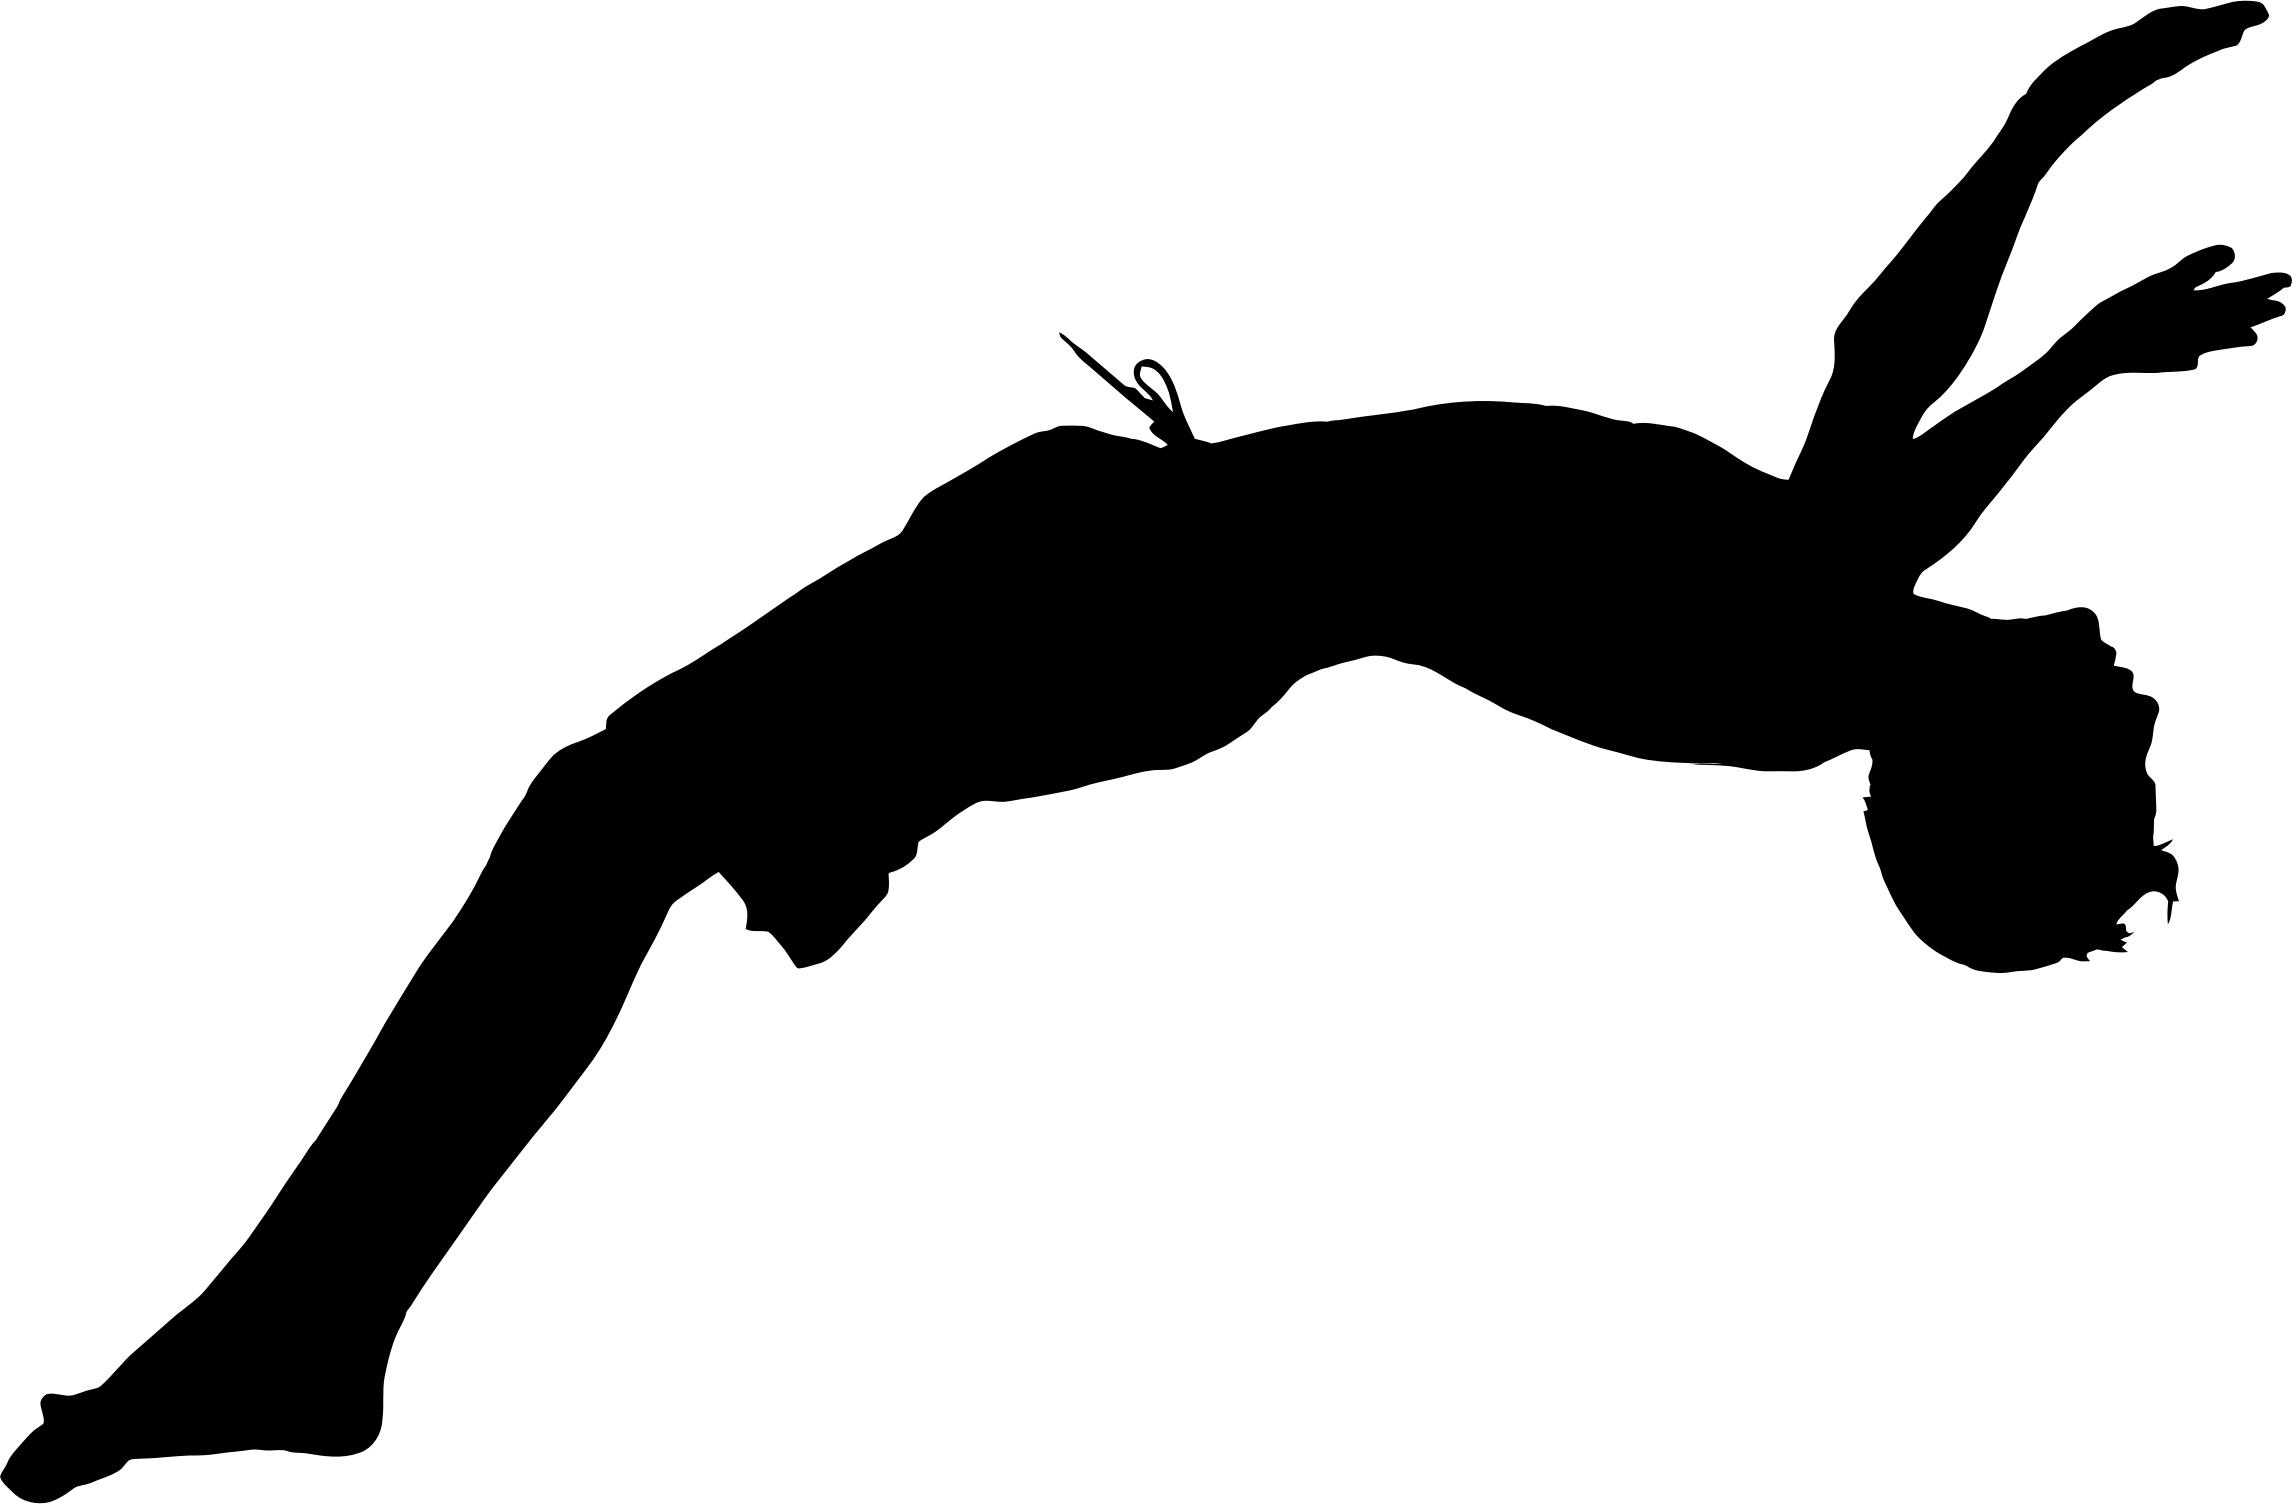 Boy Diving Backwards Silhouette png